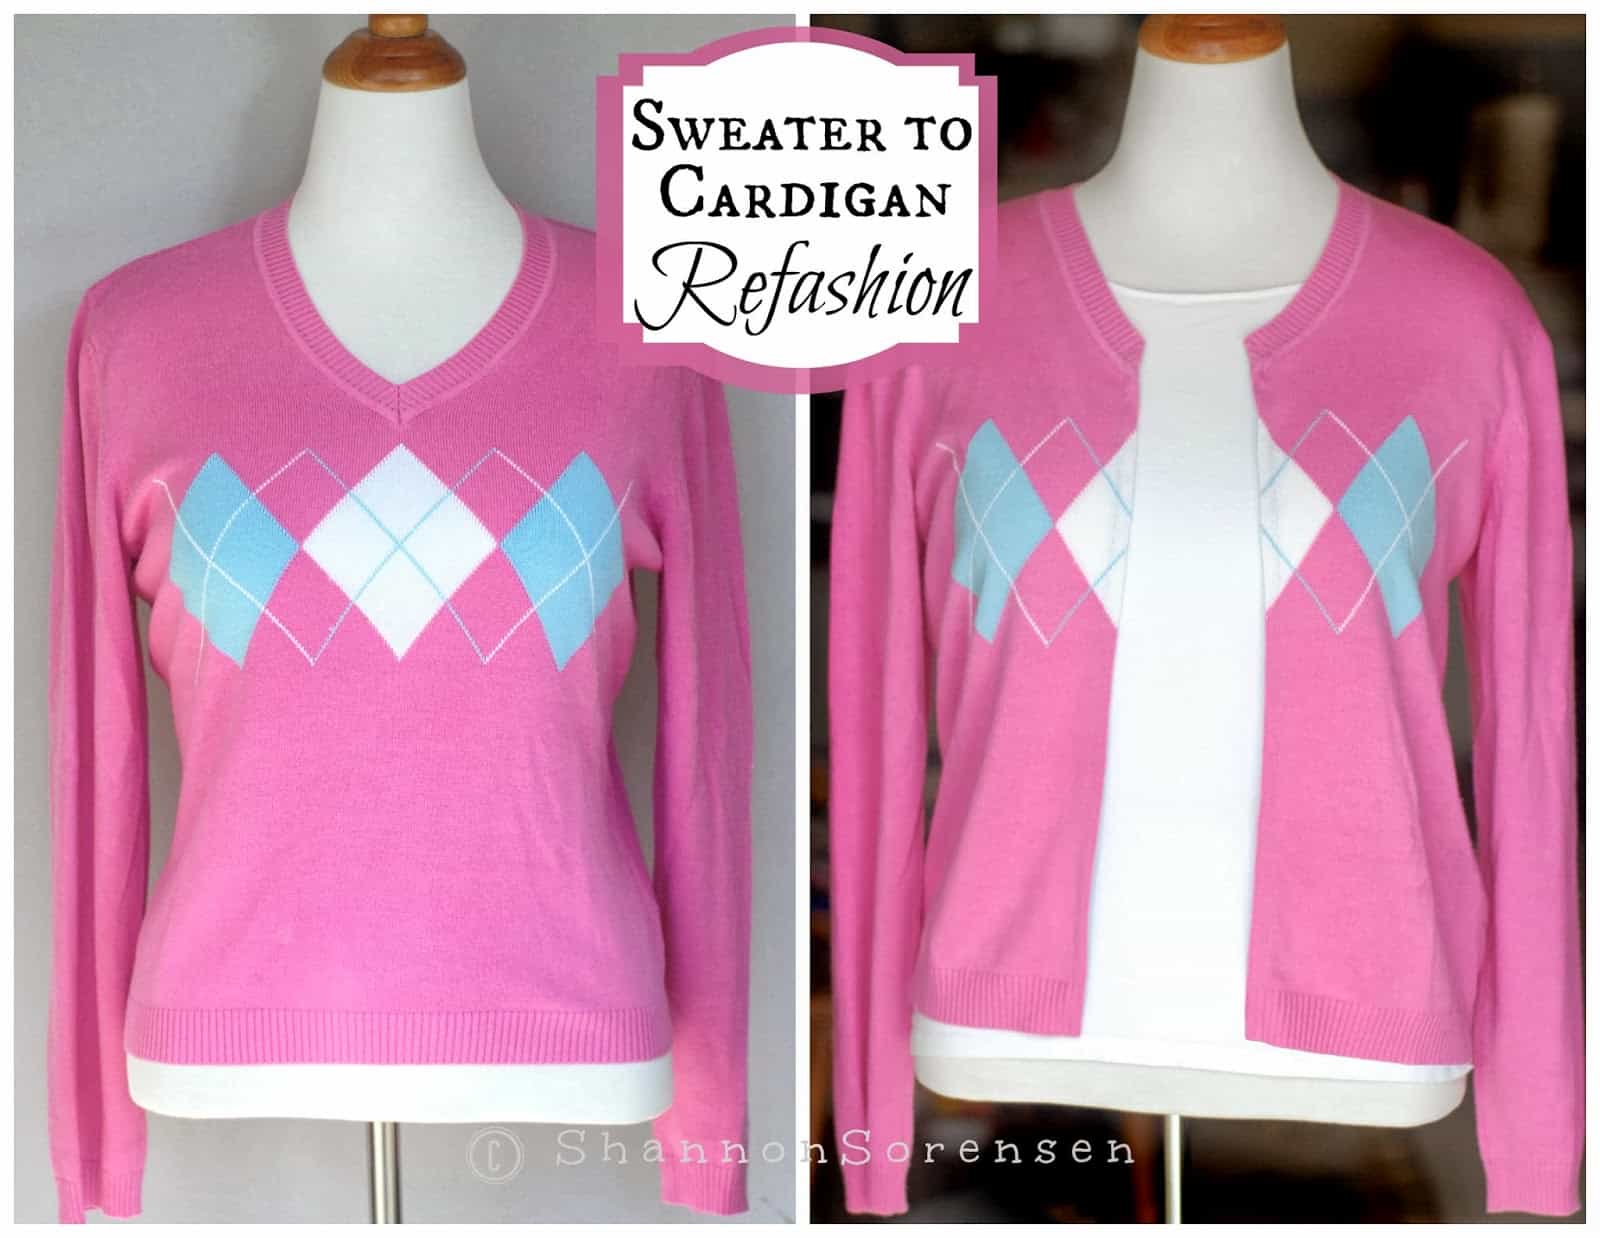 How to refashion a sweater into a cardigan